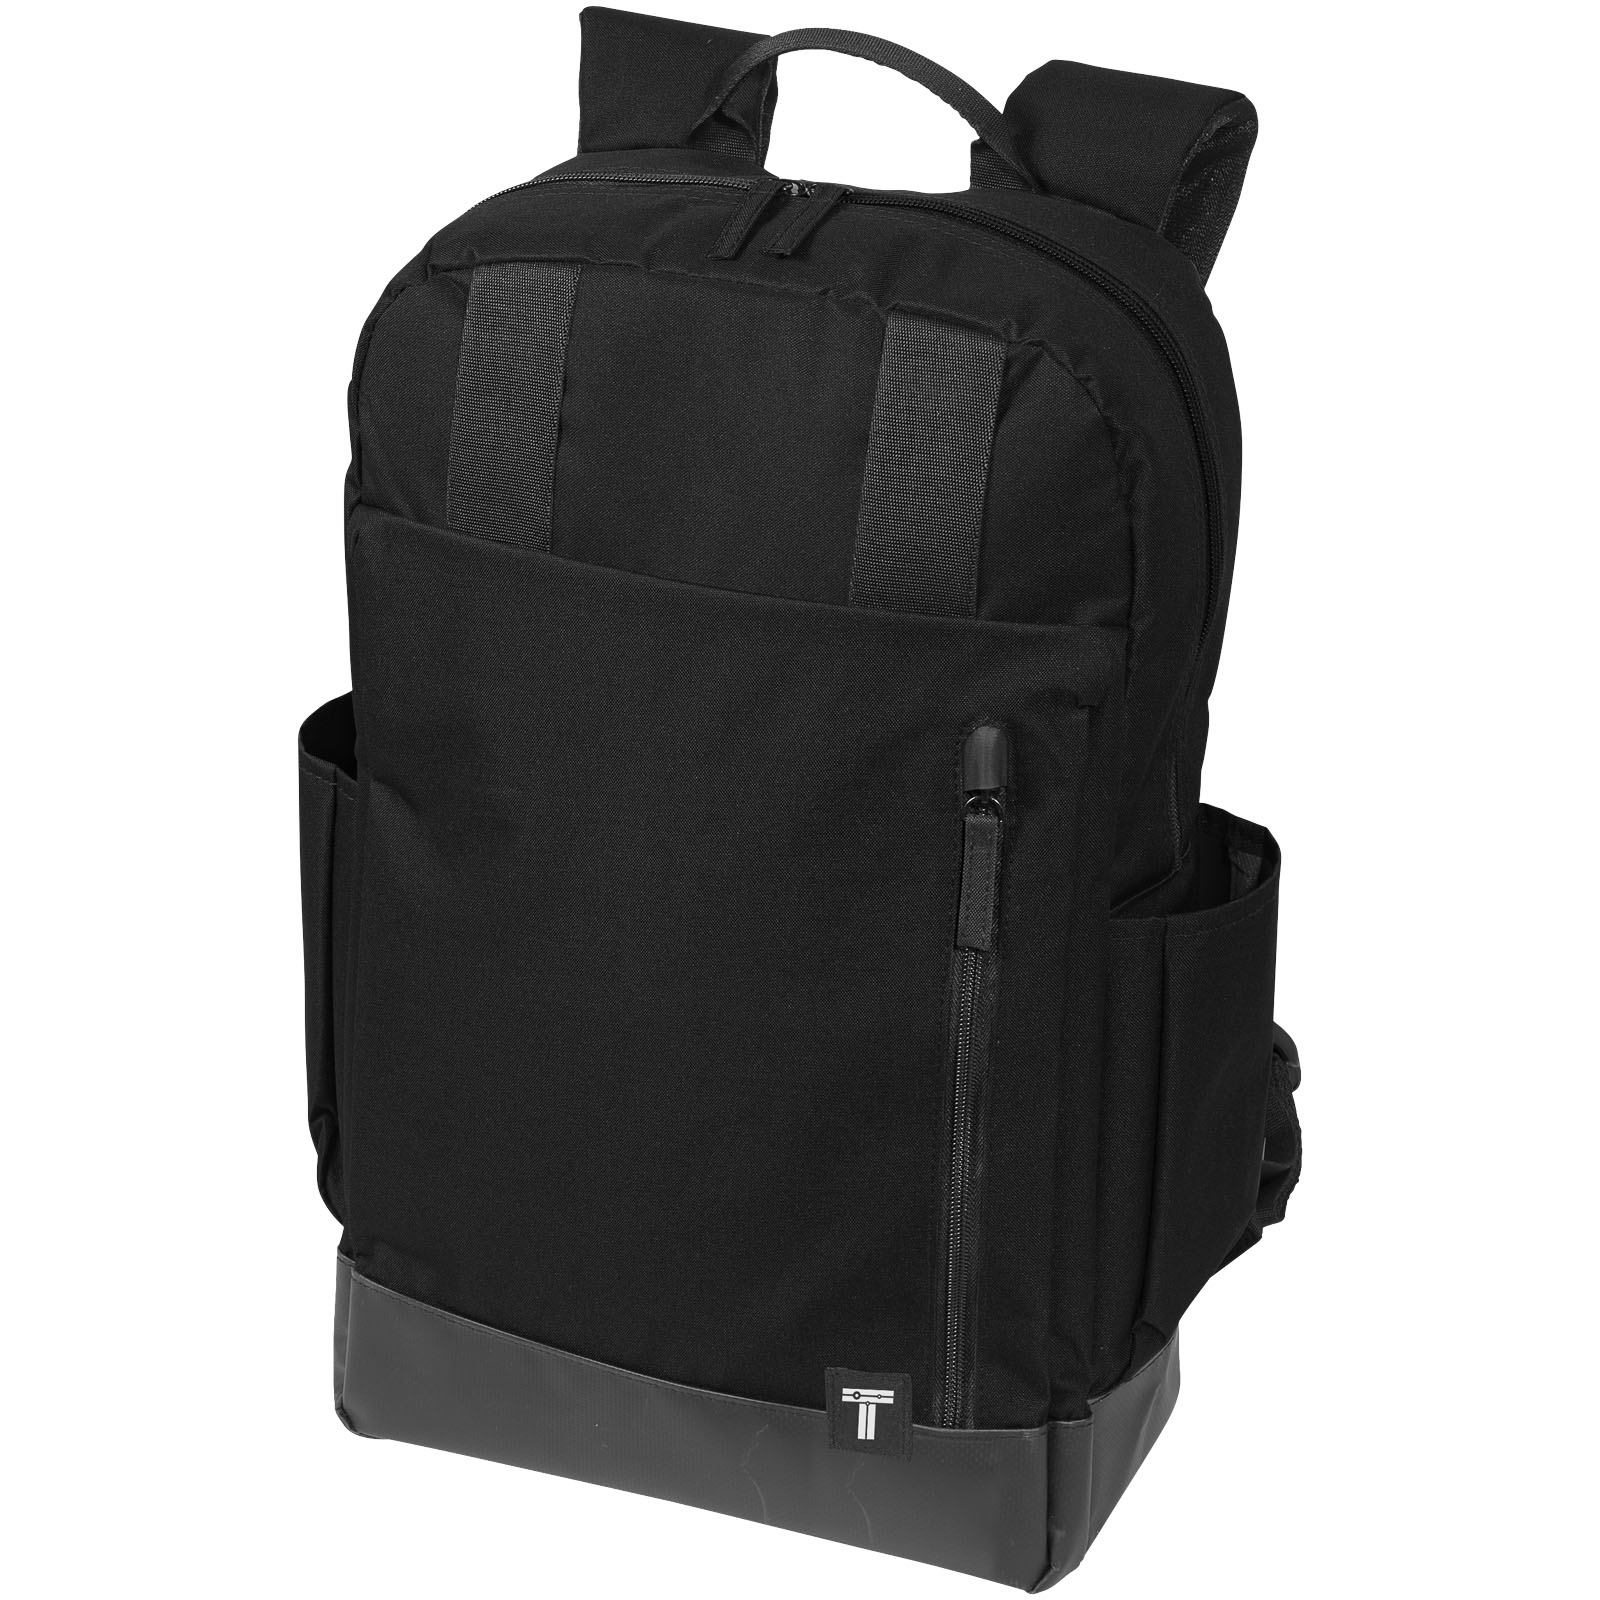 TechPro backpack - Little Snoring - Liverpool